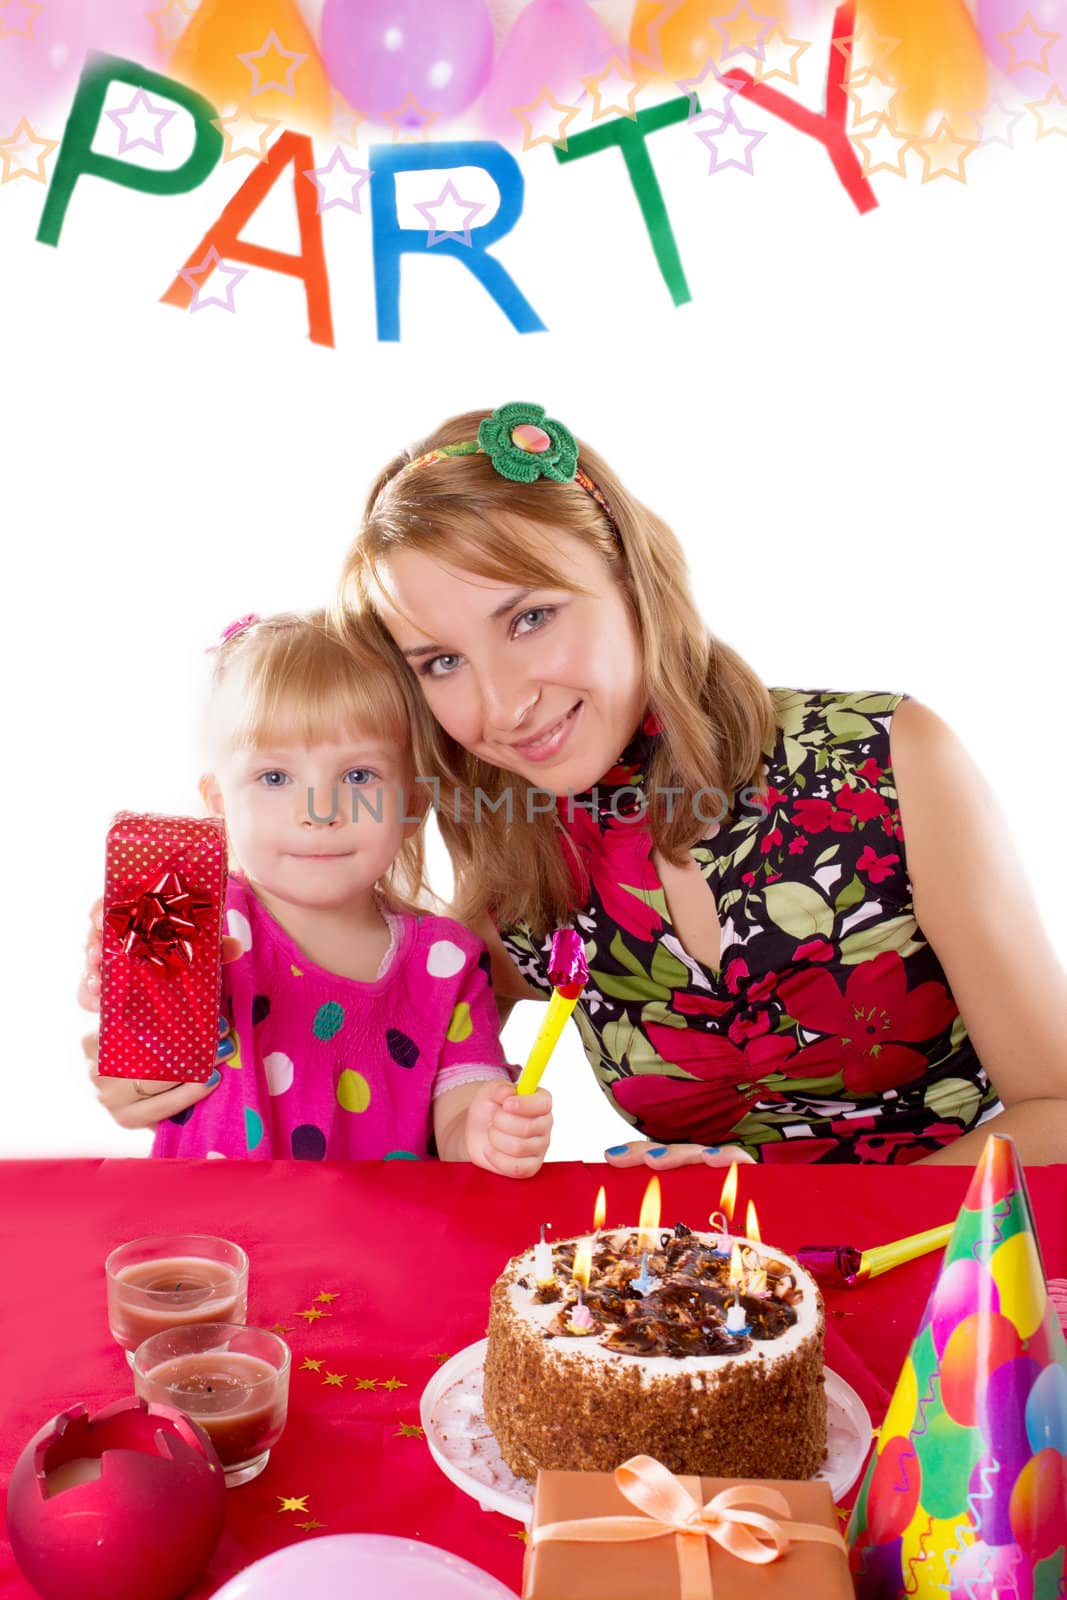 Mother and little girl at party table with gifts and cake